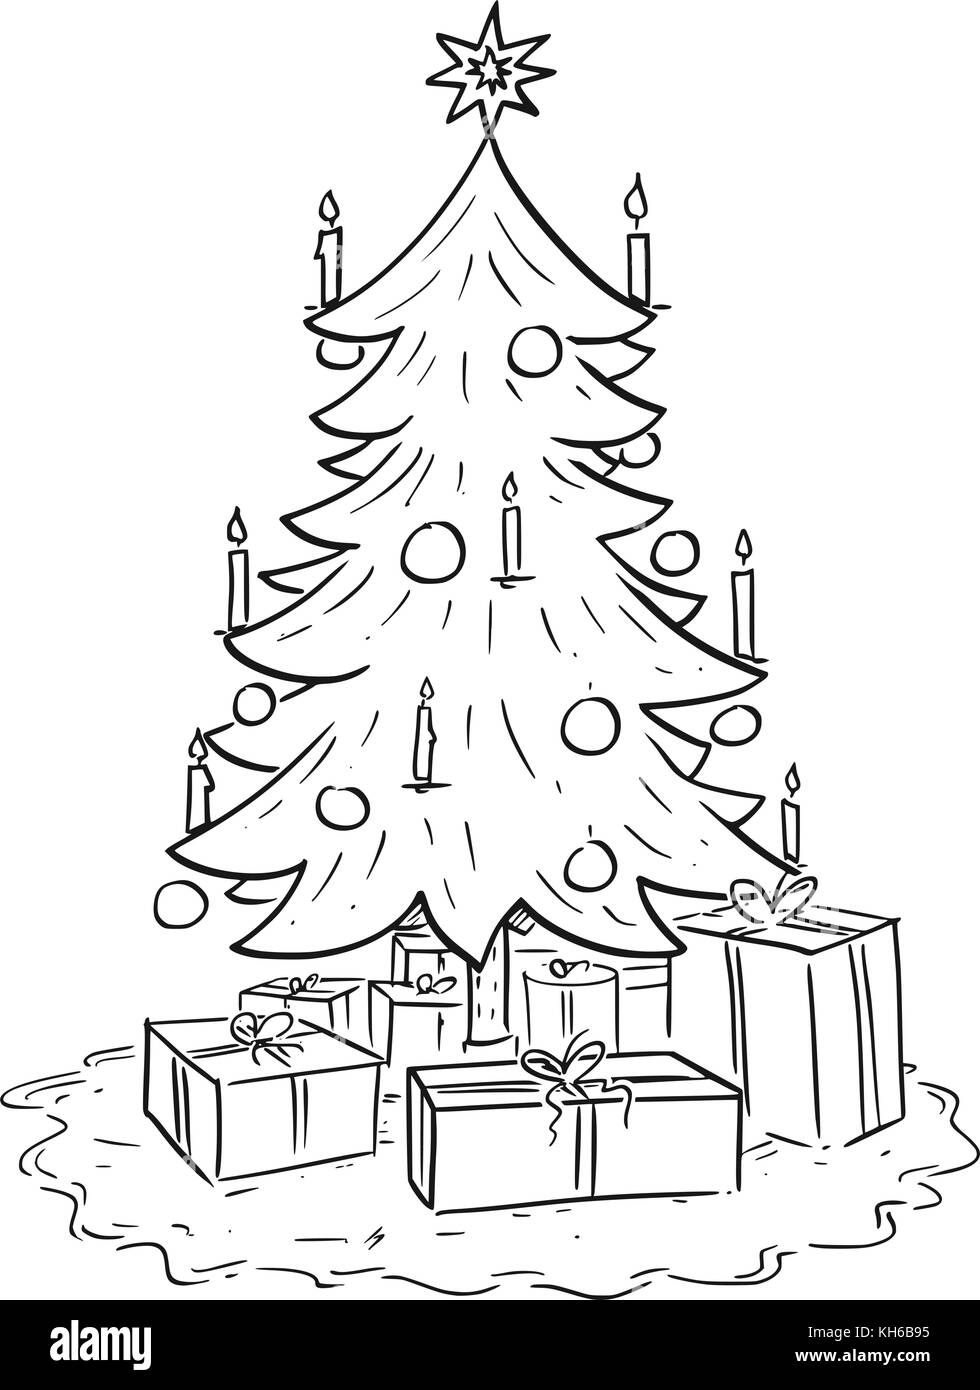 Christmas tree and gifts (child's drawing on the computer Stock